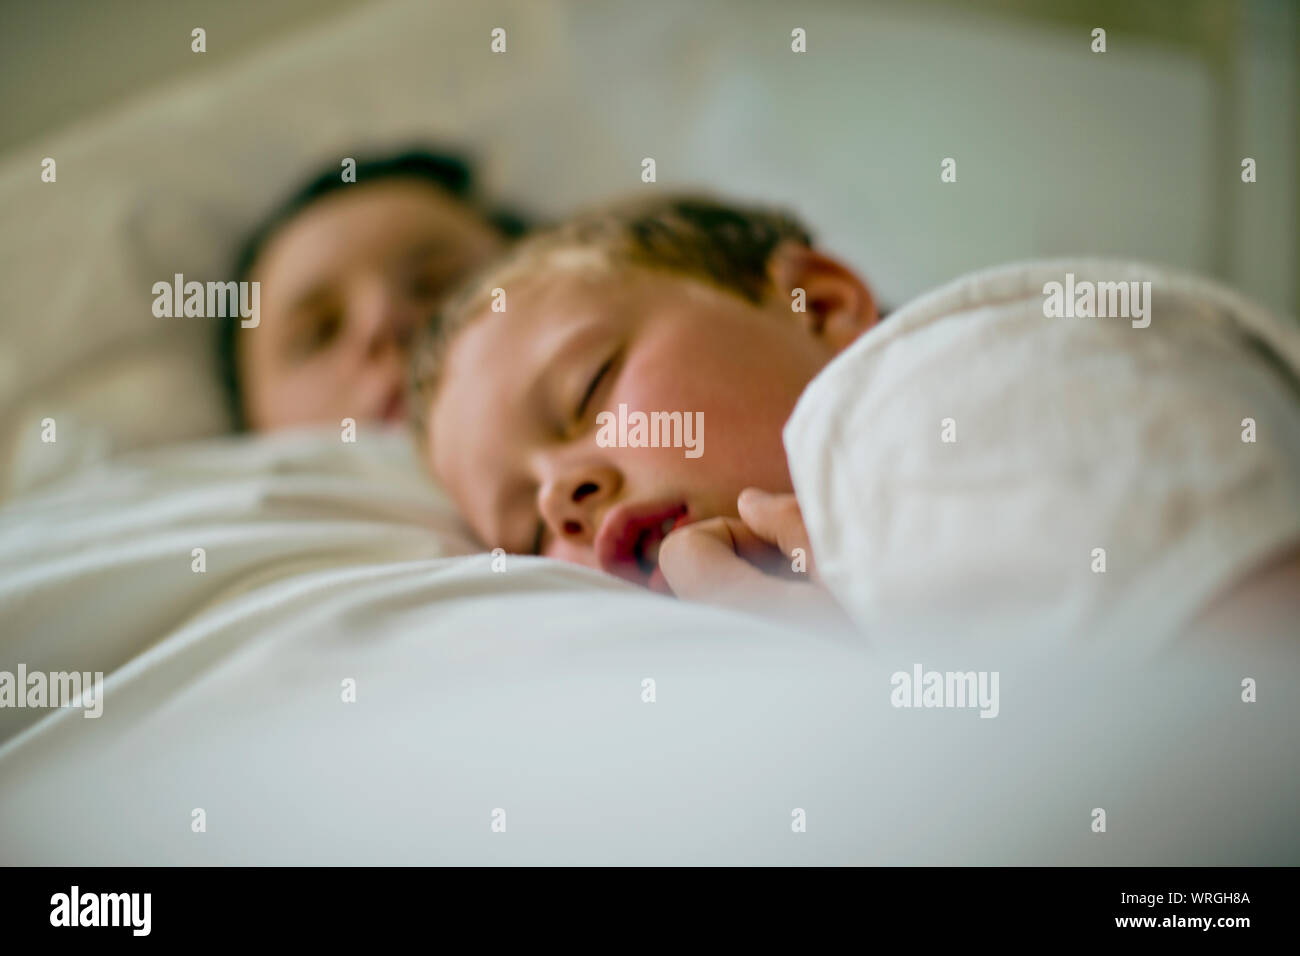 Two brothers napping together. Stock Photo